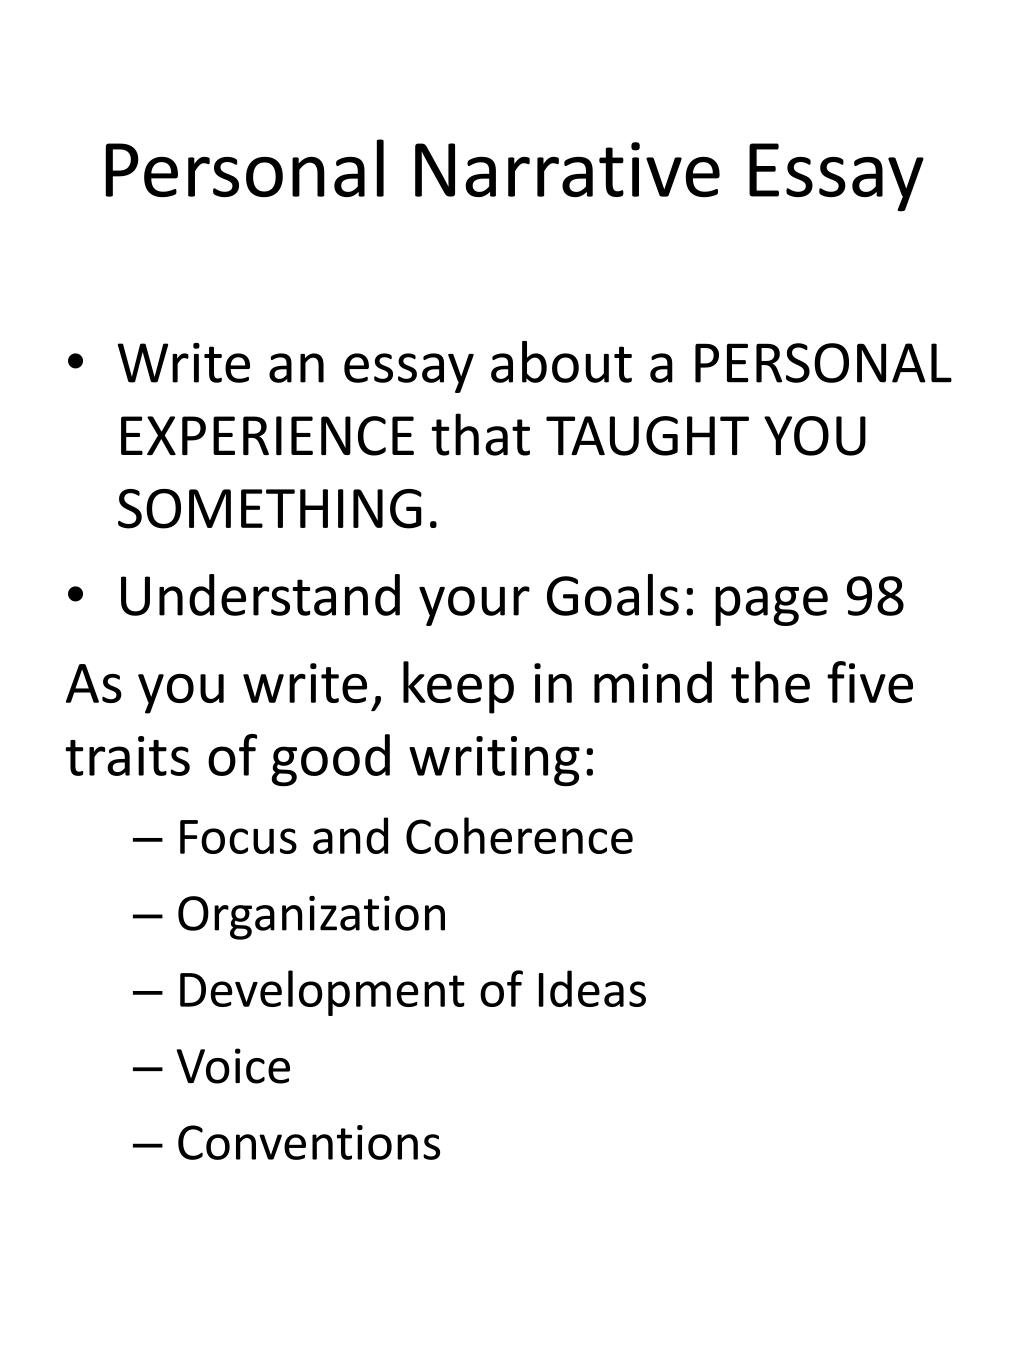 PPT - Personal Narrative Essay PowerPoint Presentation, free